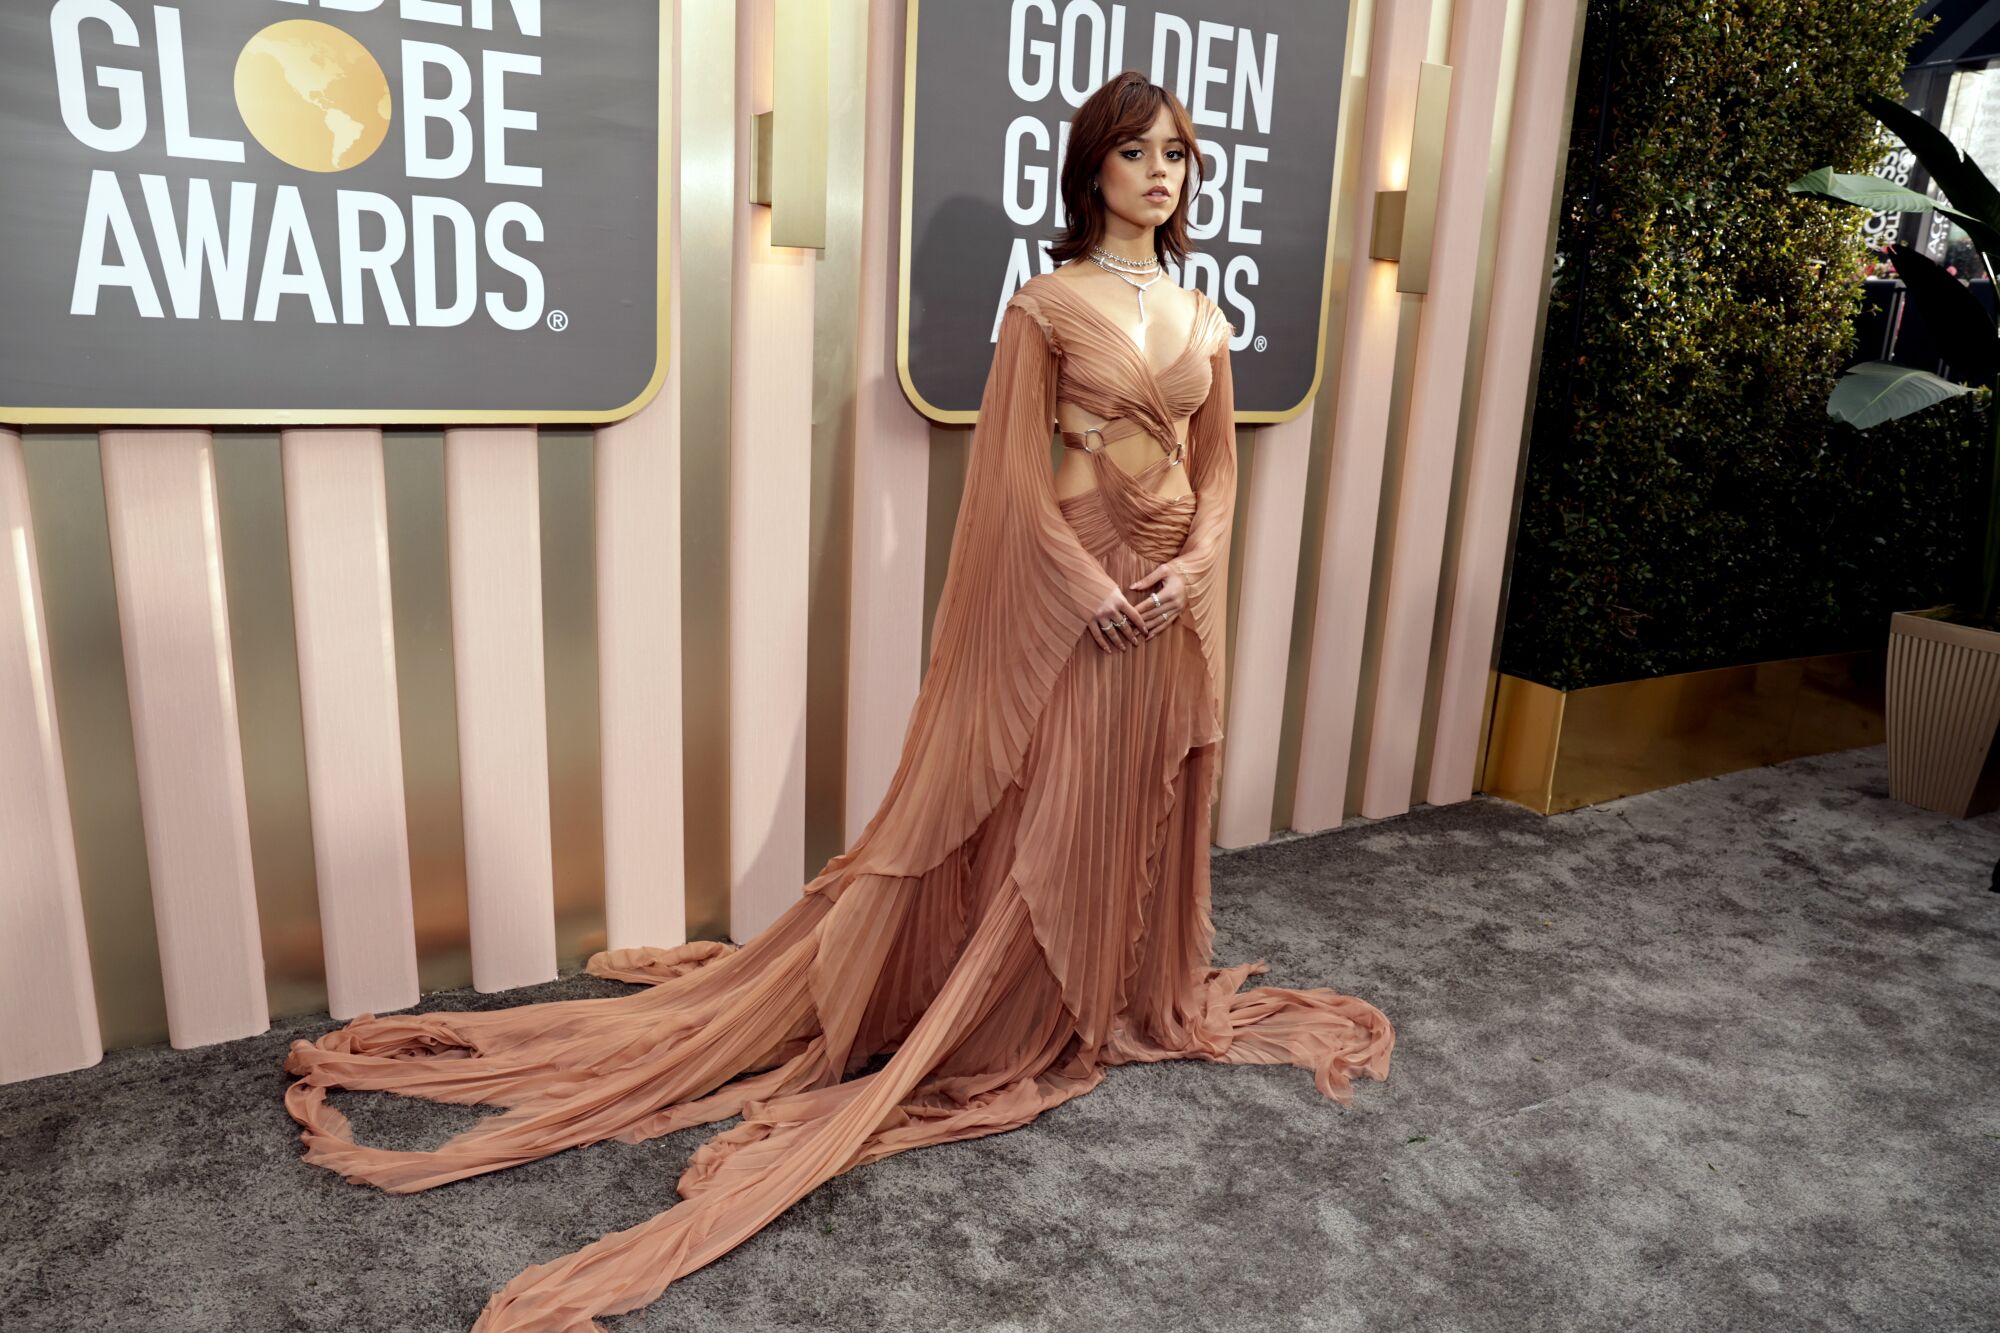 Jenna Ortega poses at the Golden Globes in a Gucci gown